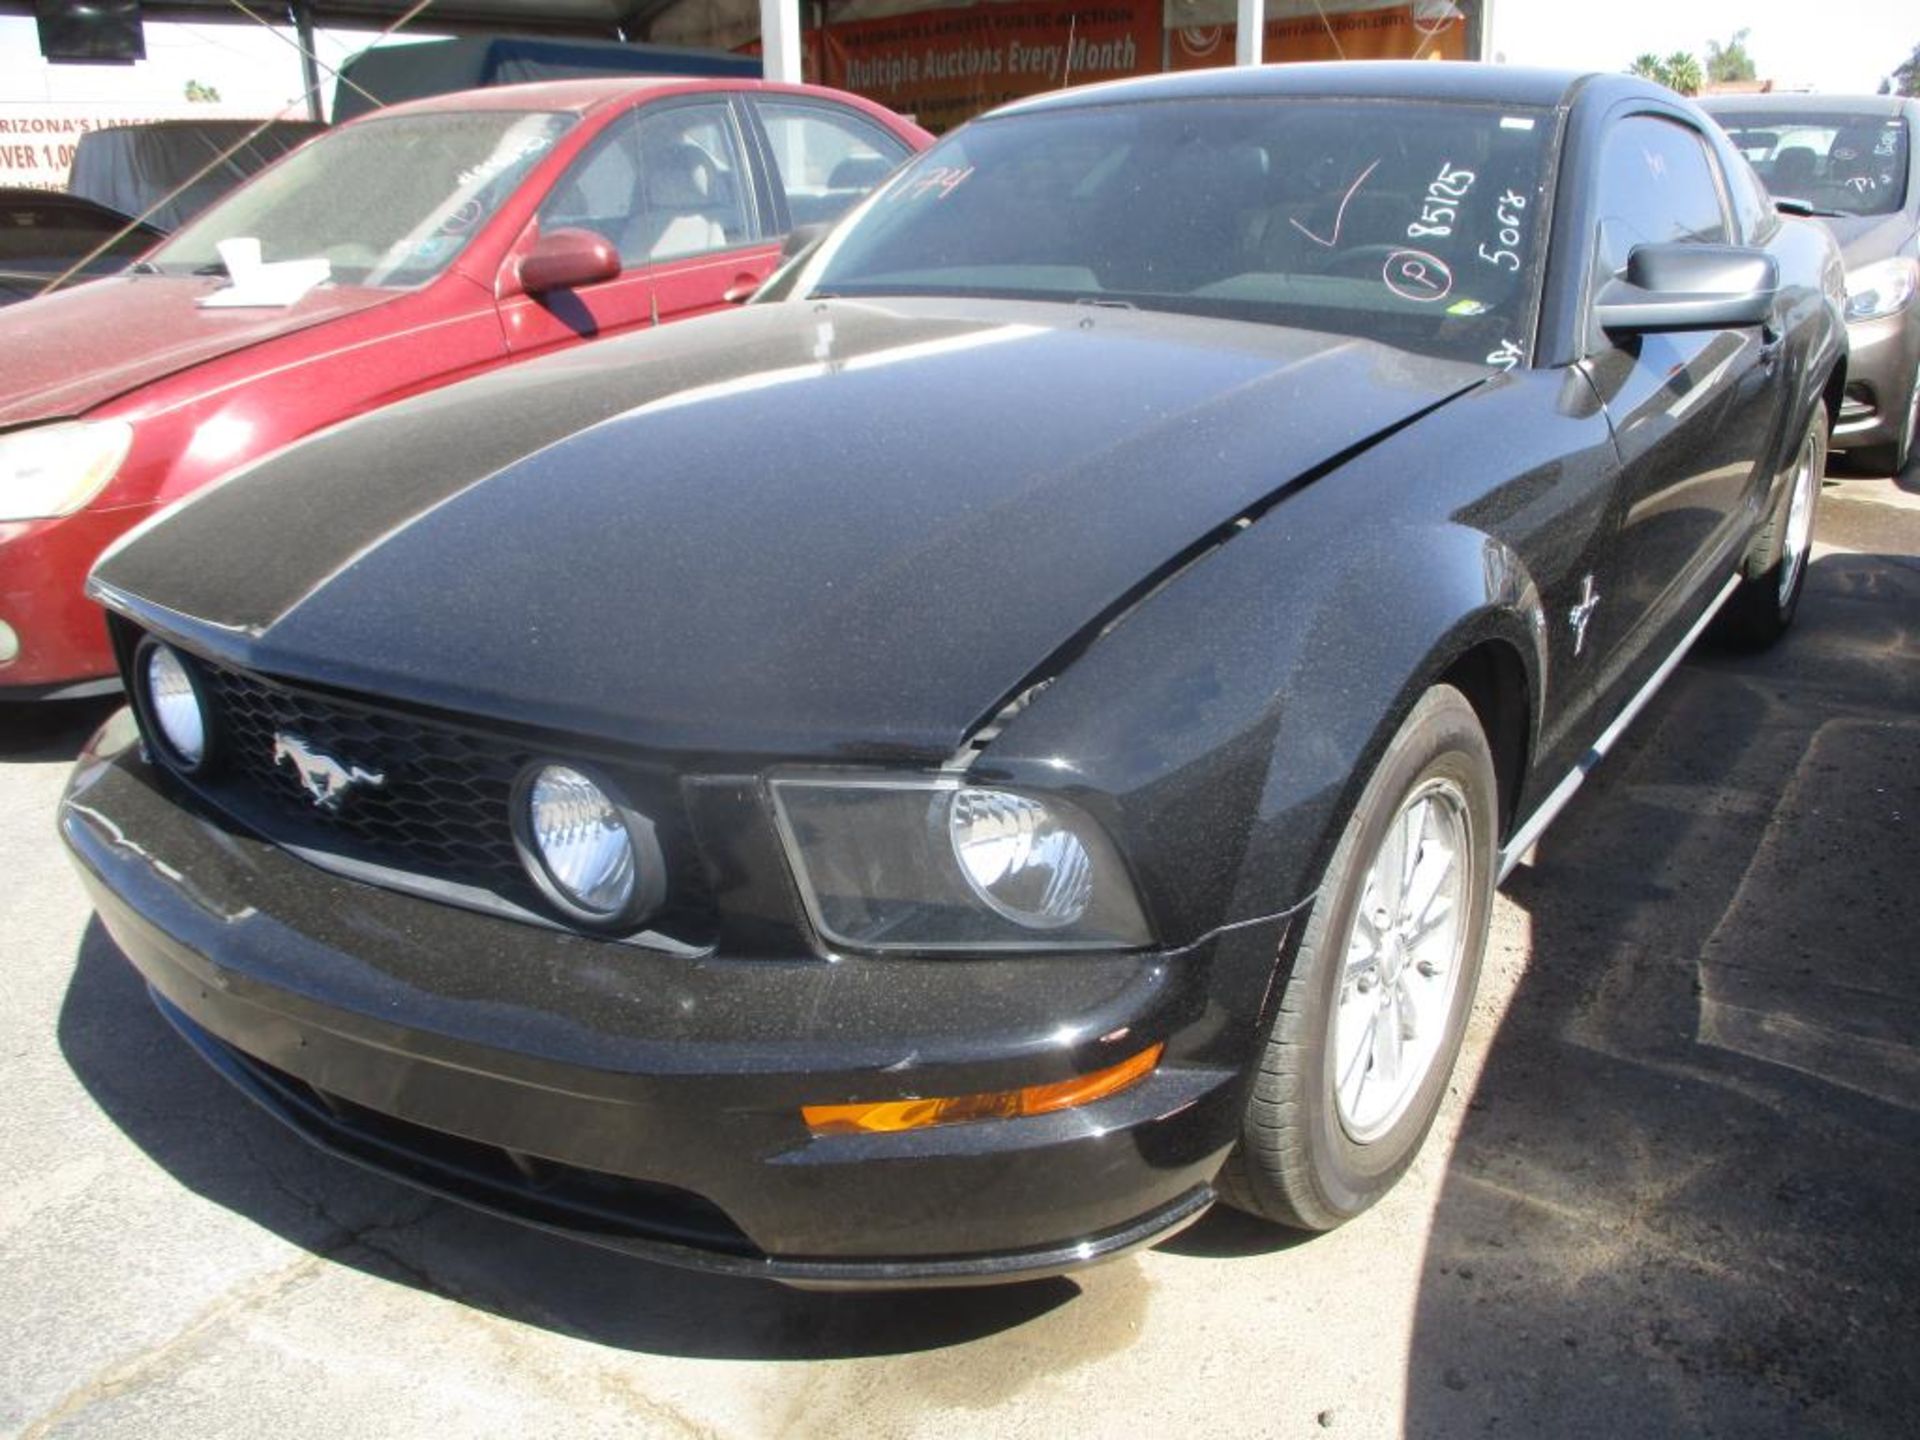 (Lot # 3322) 2007 Ford Mustang